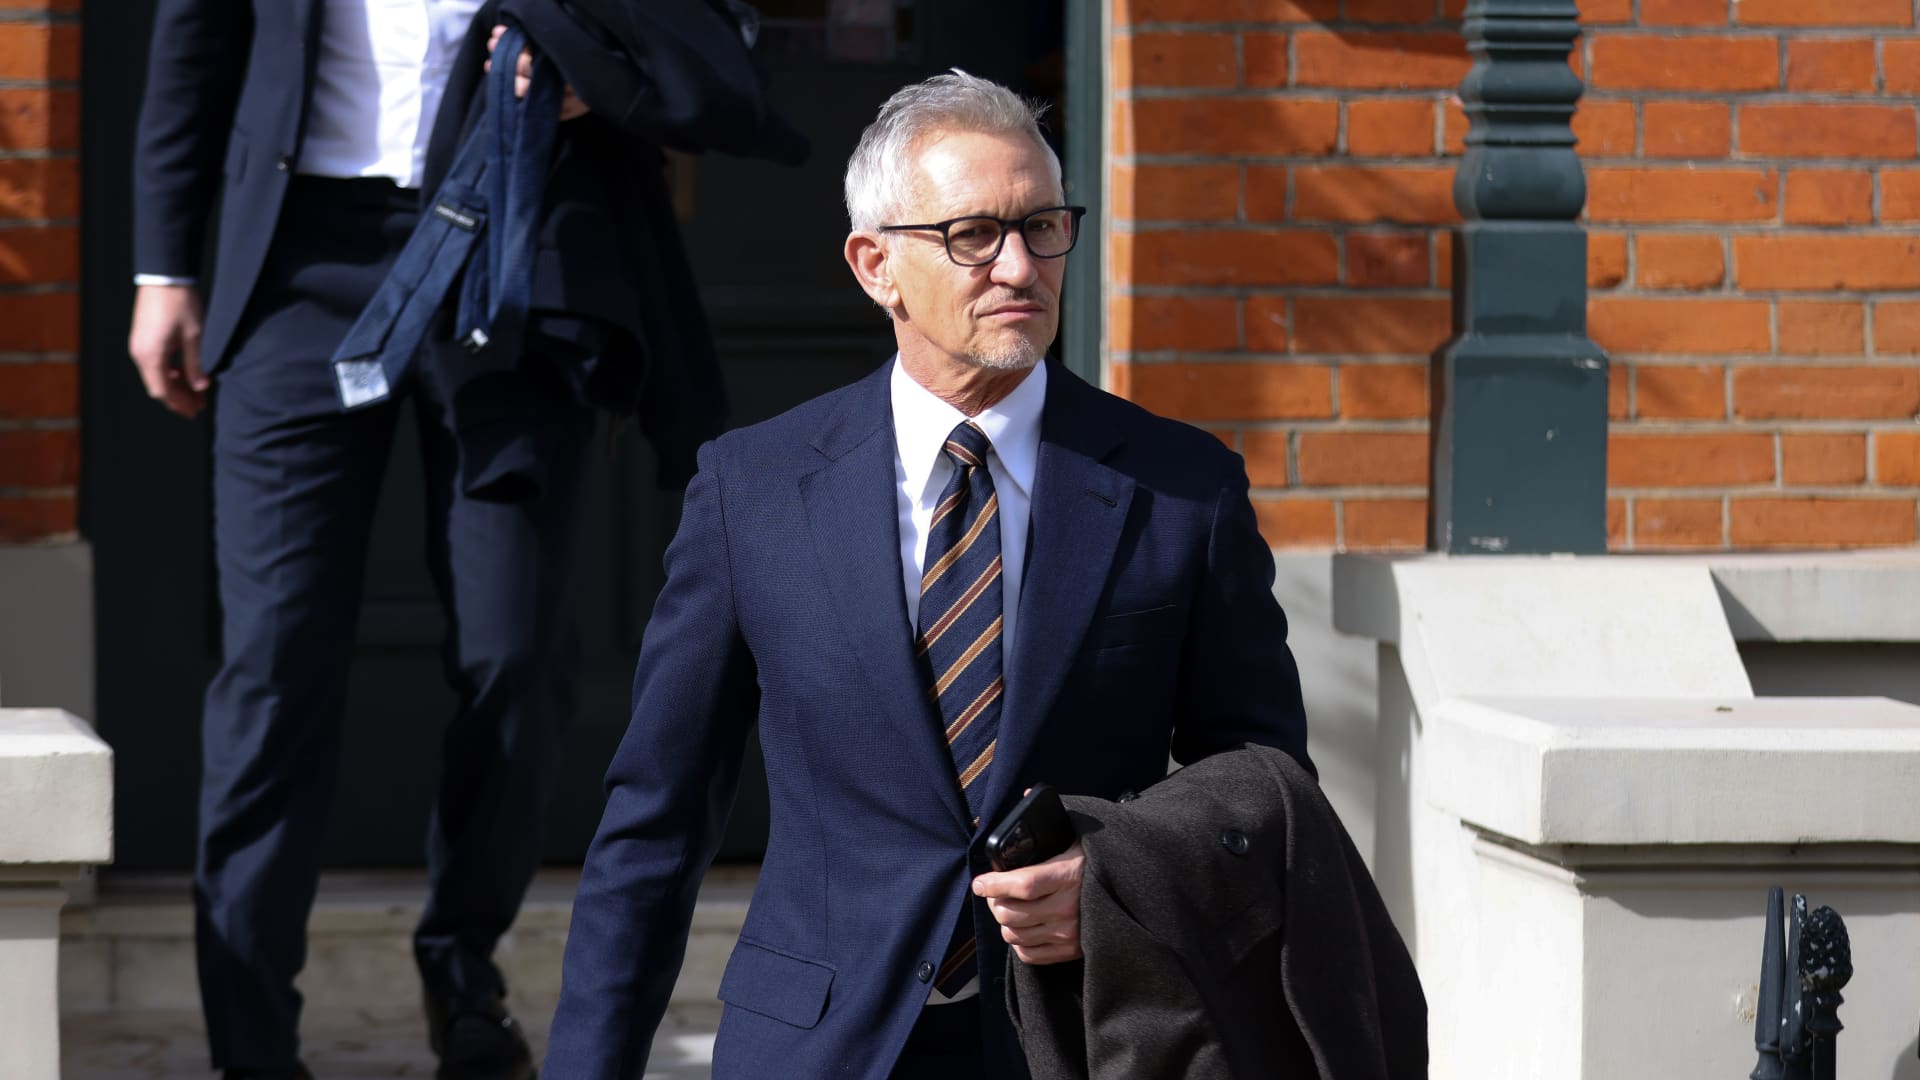 Britain’s BBC agrees star soccer host Gary Lineker can return to air after impartiality dispute